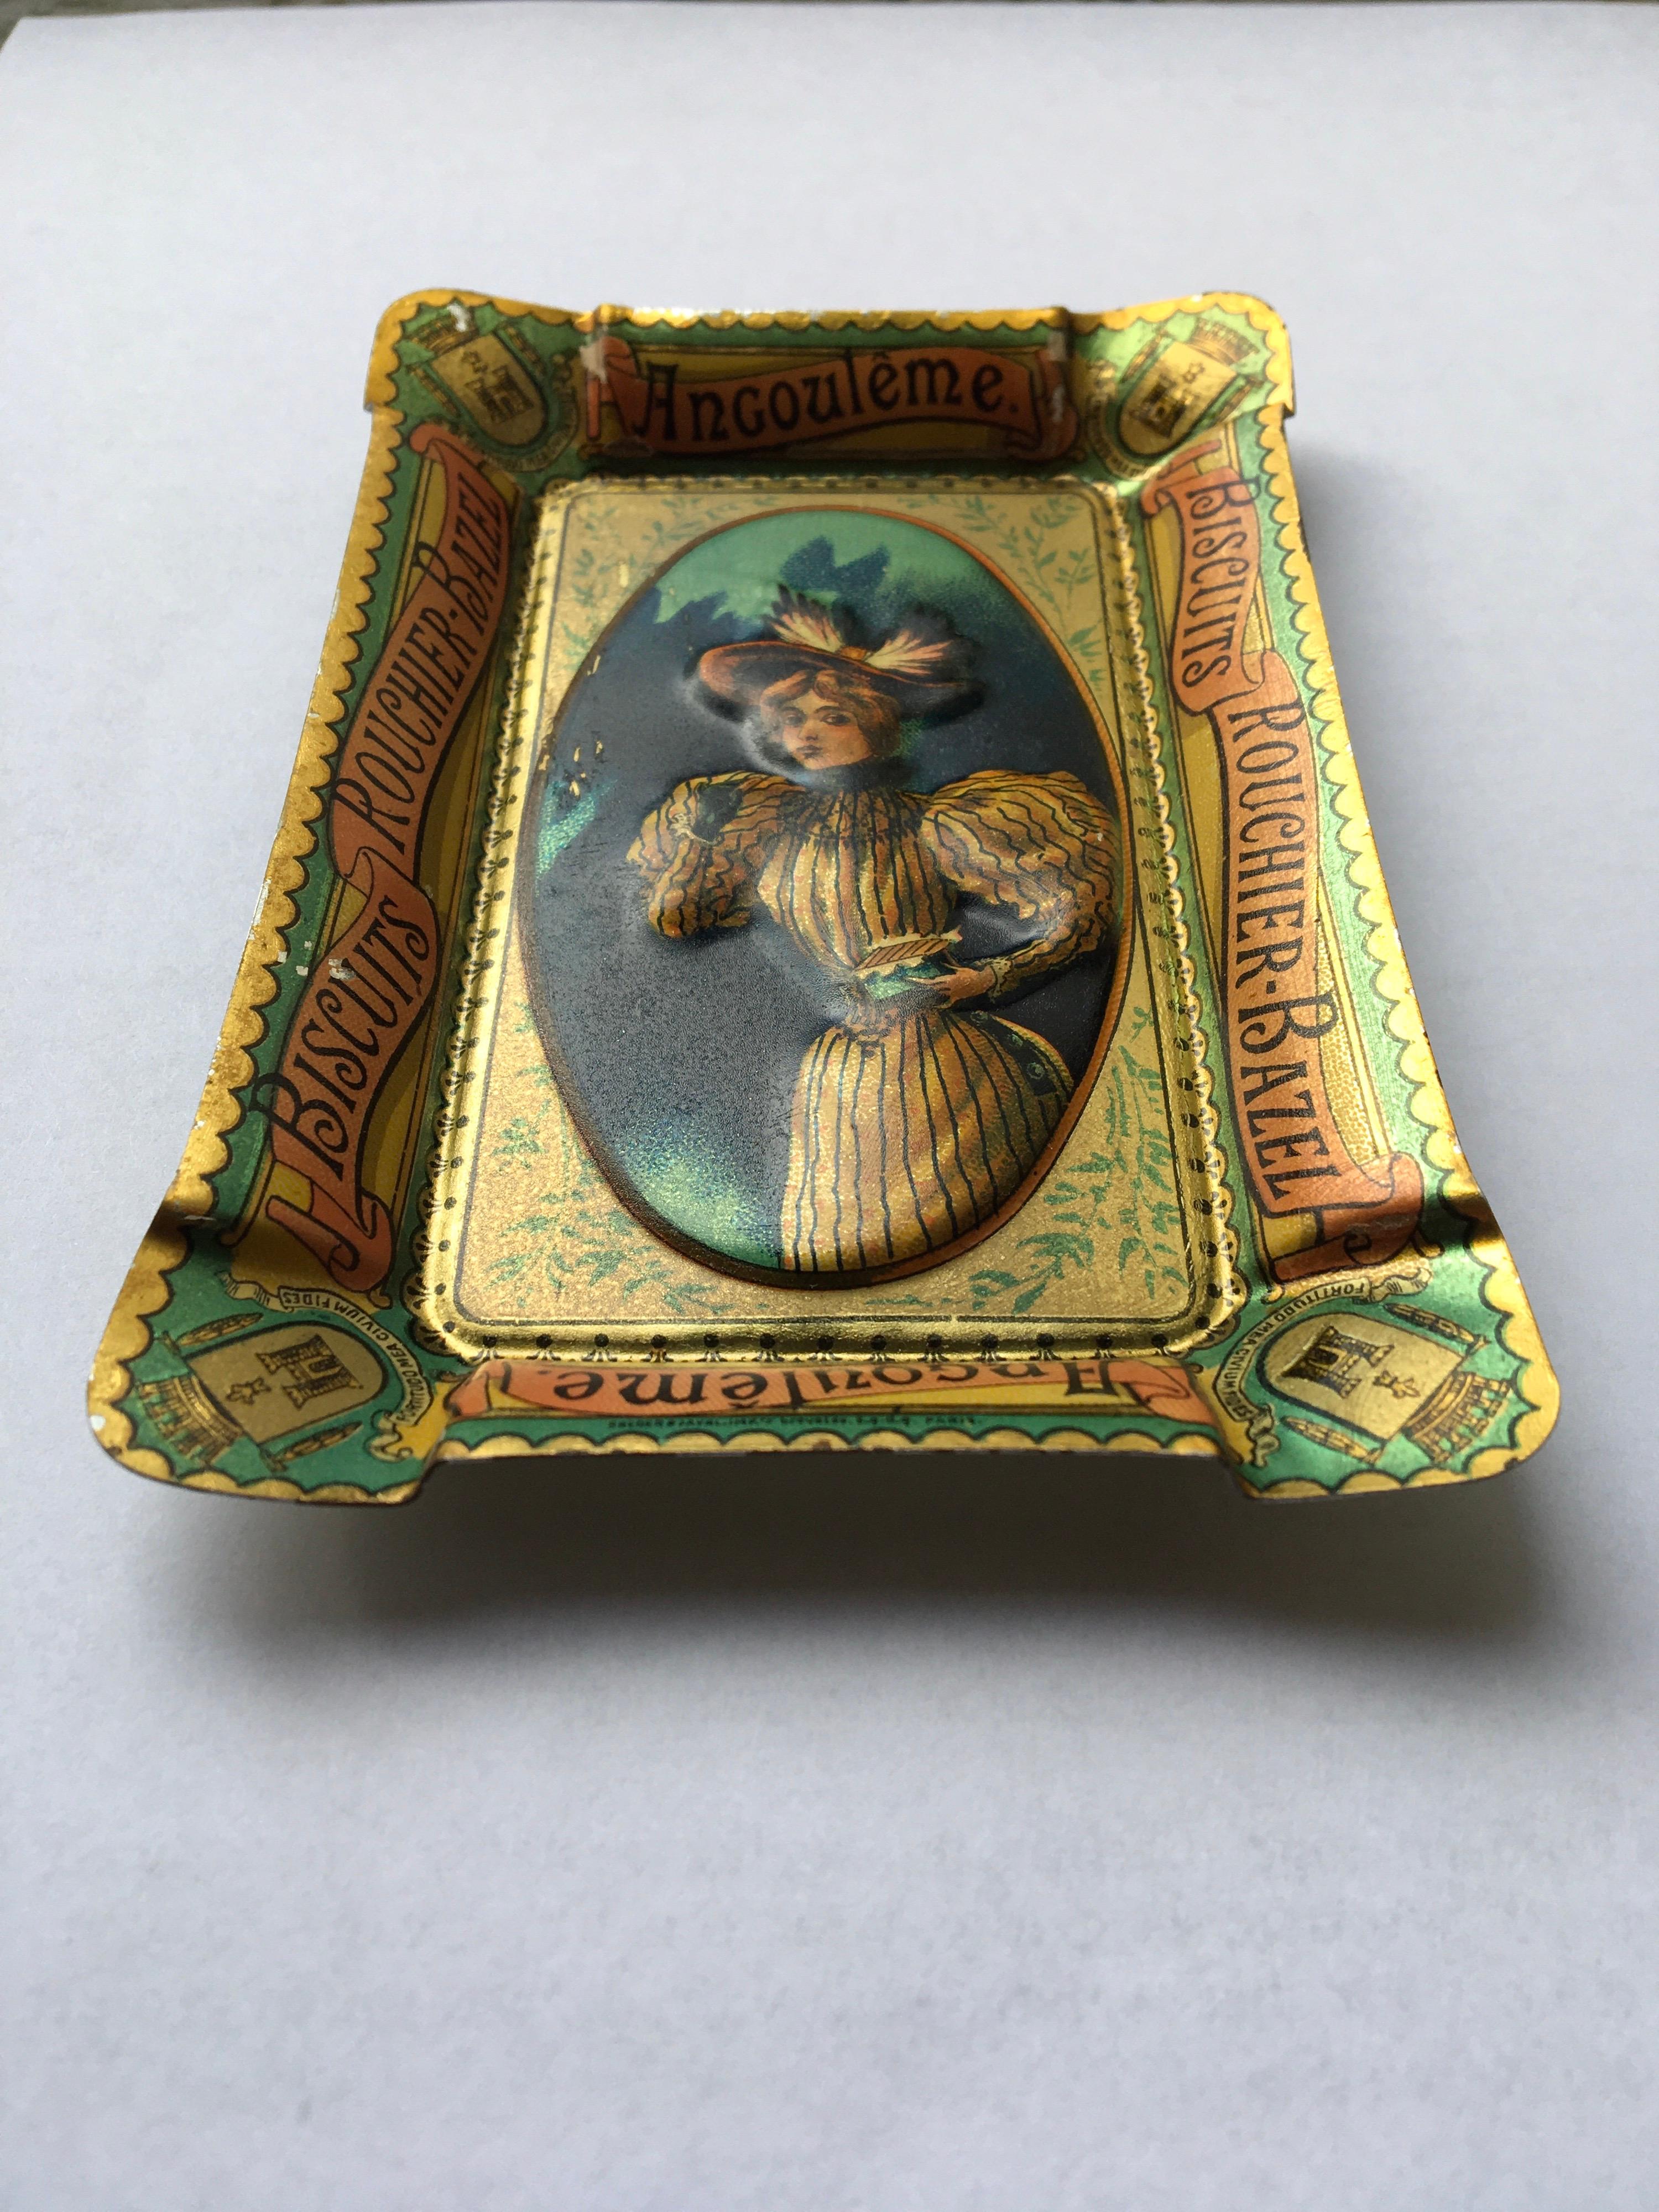 French Antique Litho Tin Tray or Ashtray for Biscuits Rouchier Bazel France, circa 1900